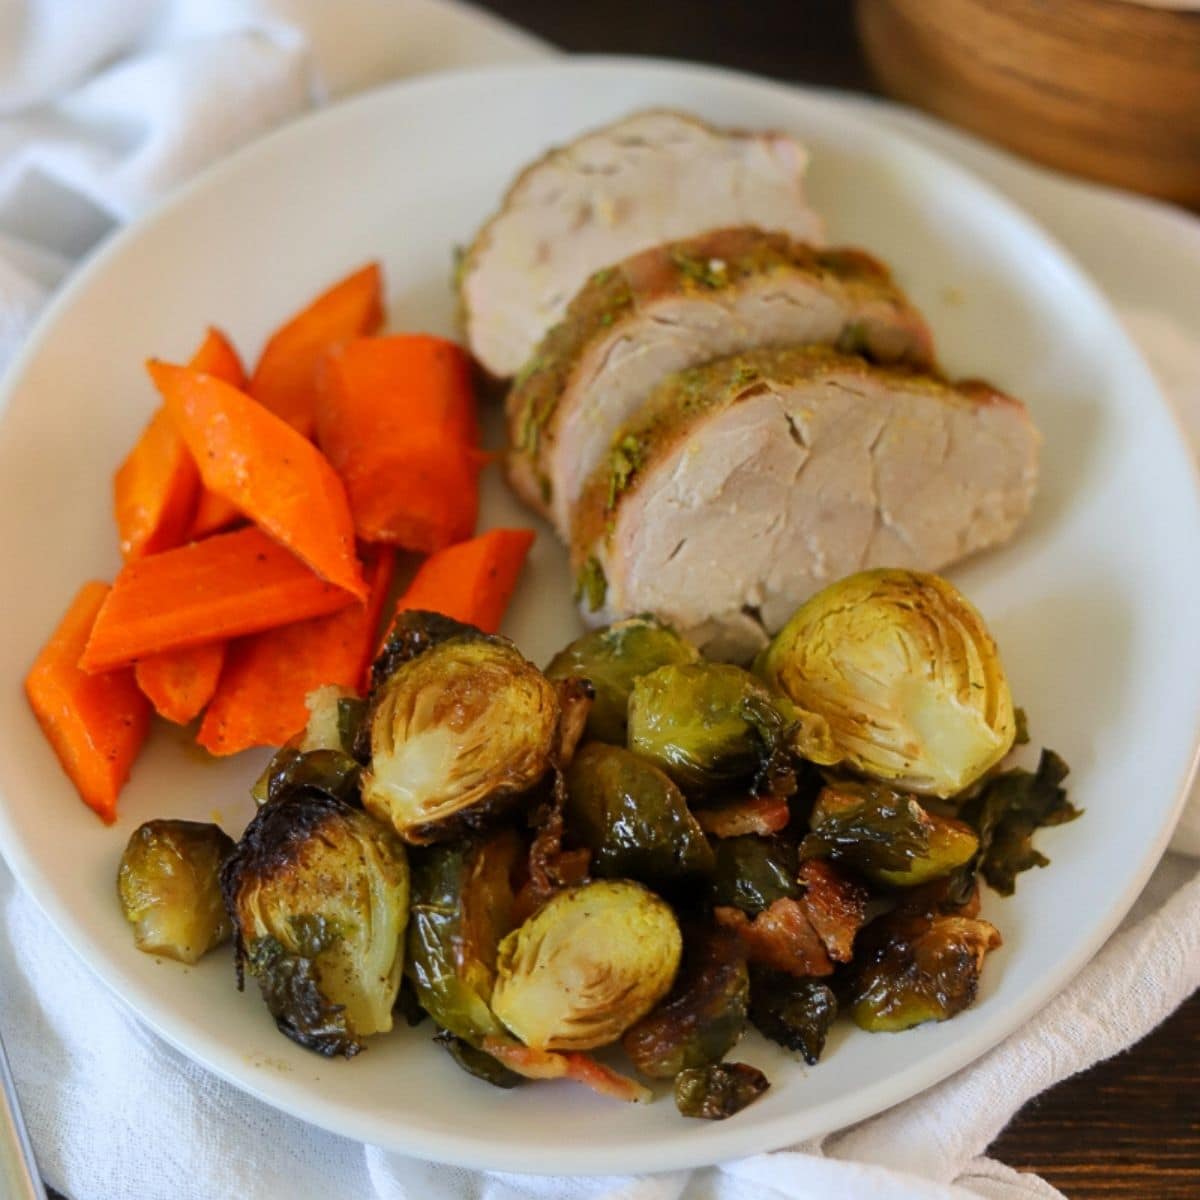 a white plate filled with sliced pork tenderloin, roasted carrots, and brussels sprouts